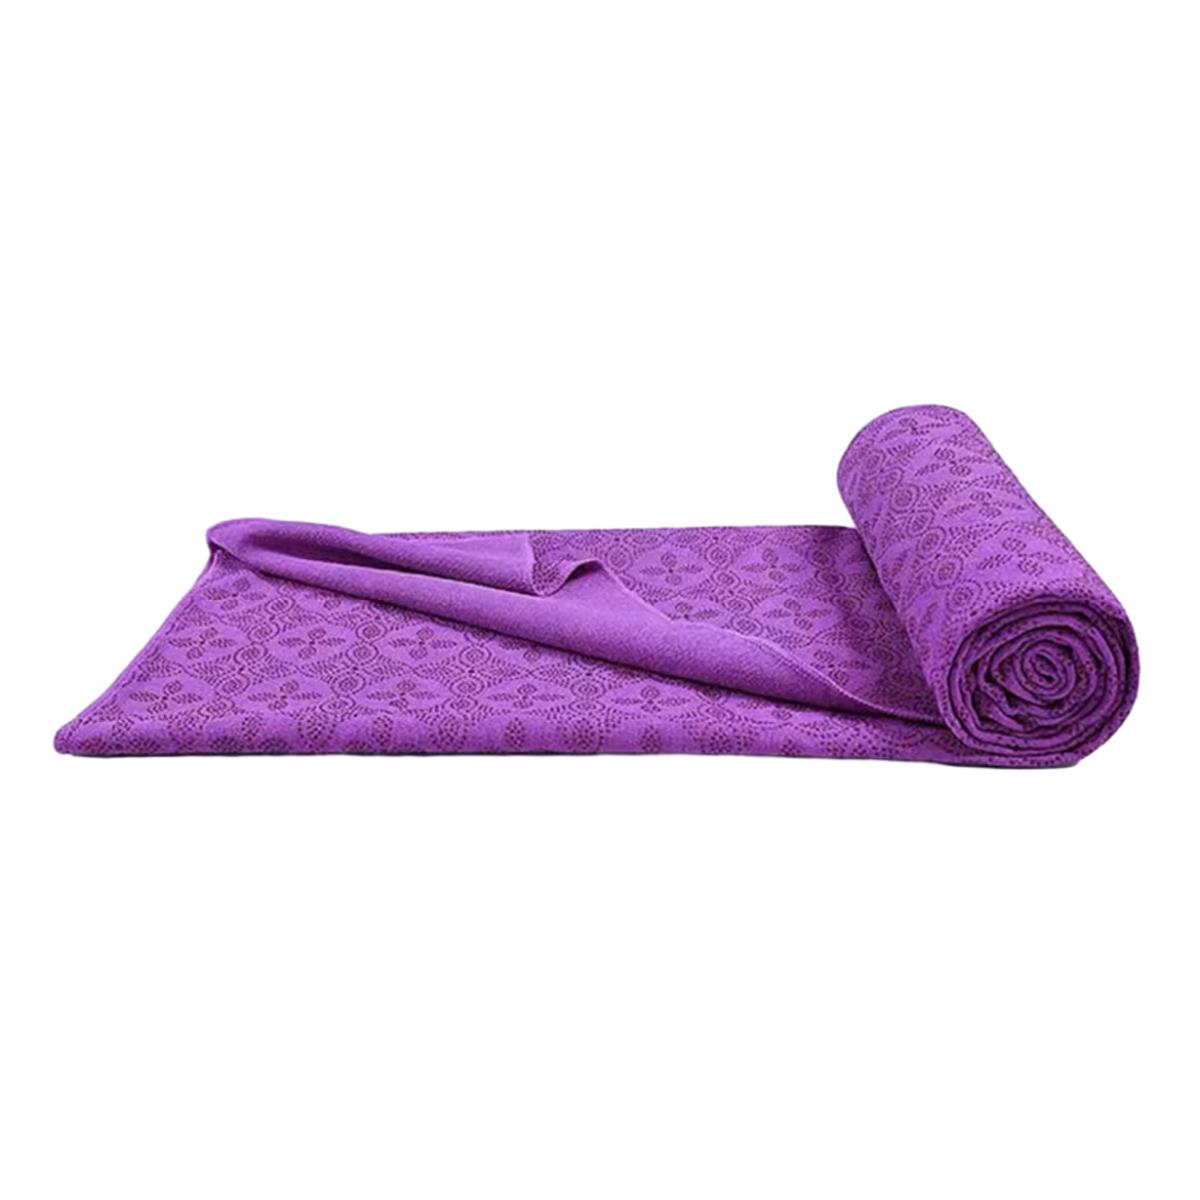 Inclined Socialist Get drunk yoga towel for sweaty hands Pack to put Zoo at  night drop